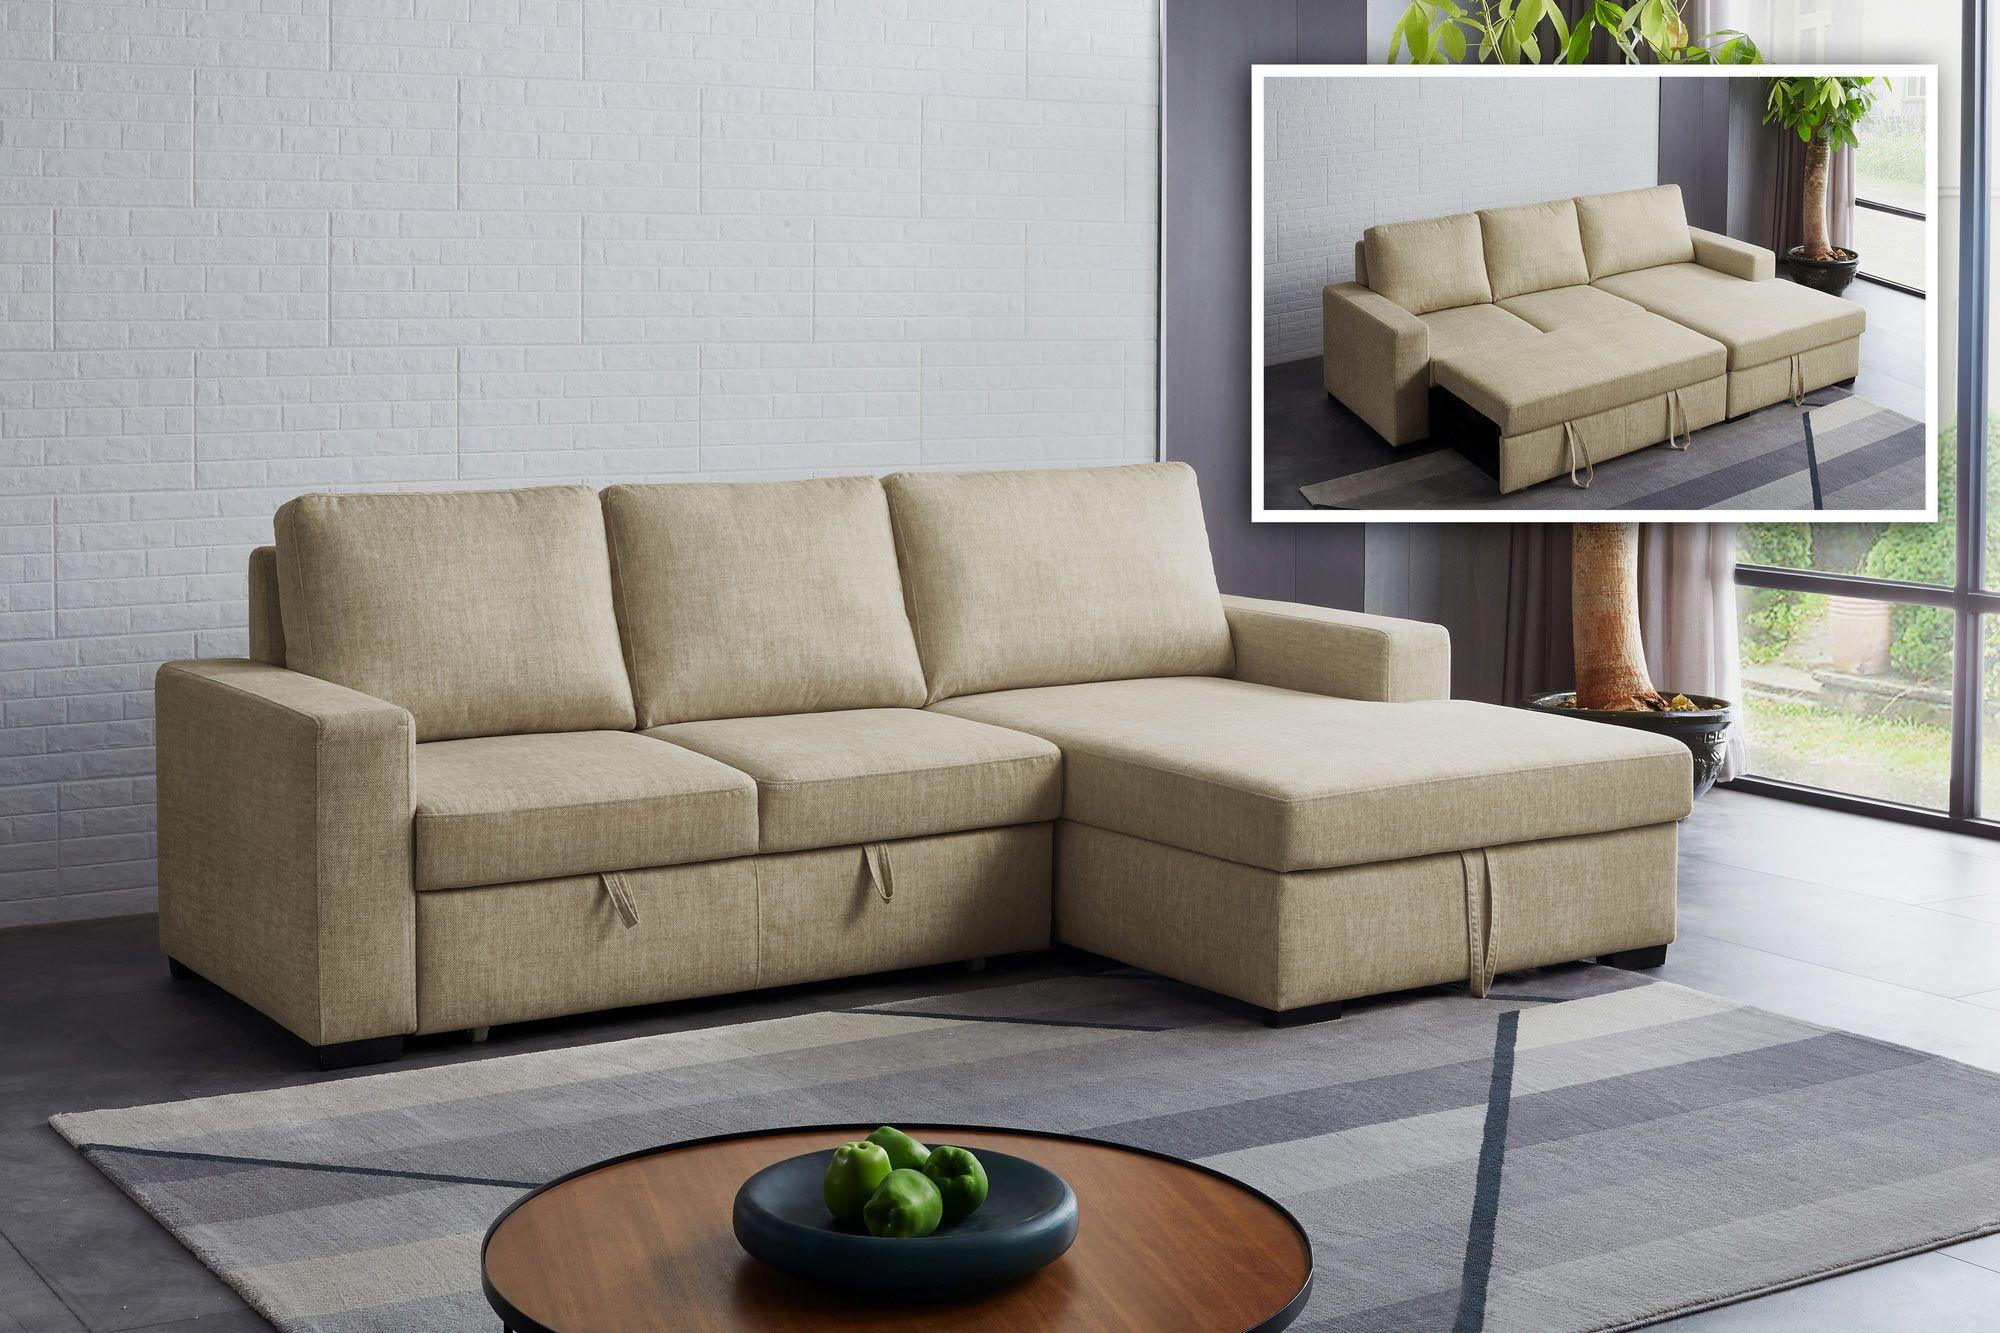 Contemporary, Modern Sectional Sofa Bed VGMB-1893 VGMB-1893 in Beige Fabric